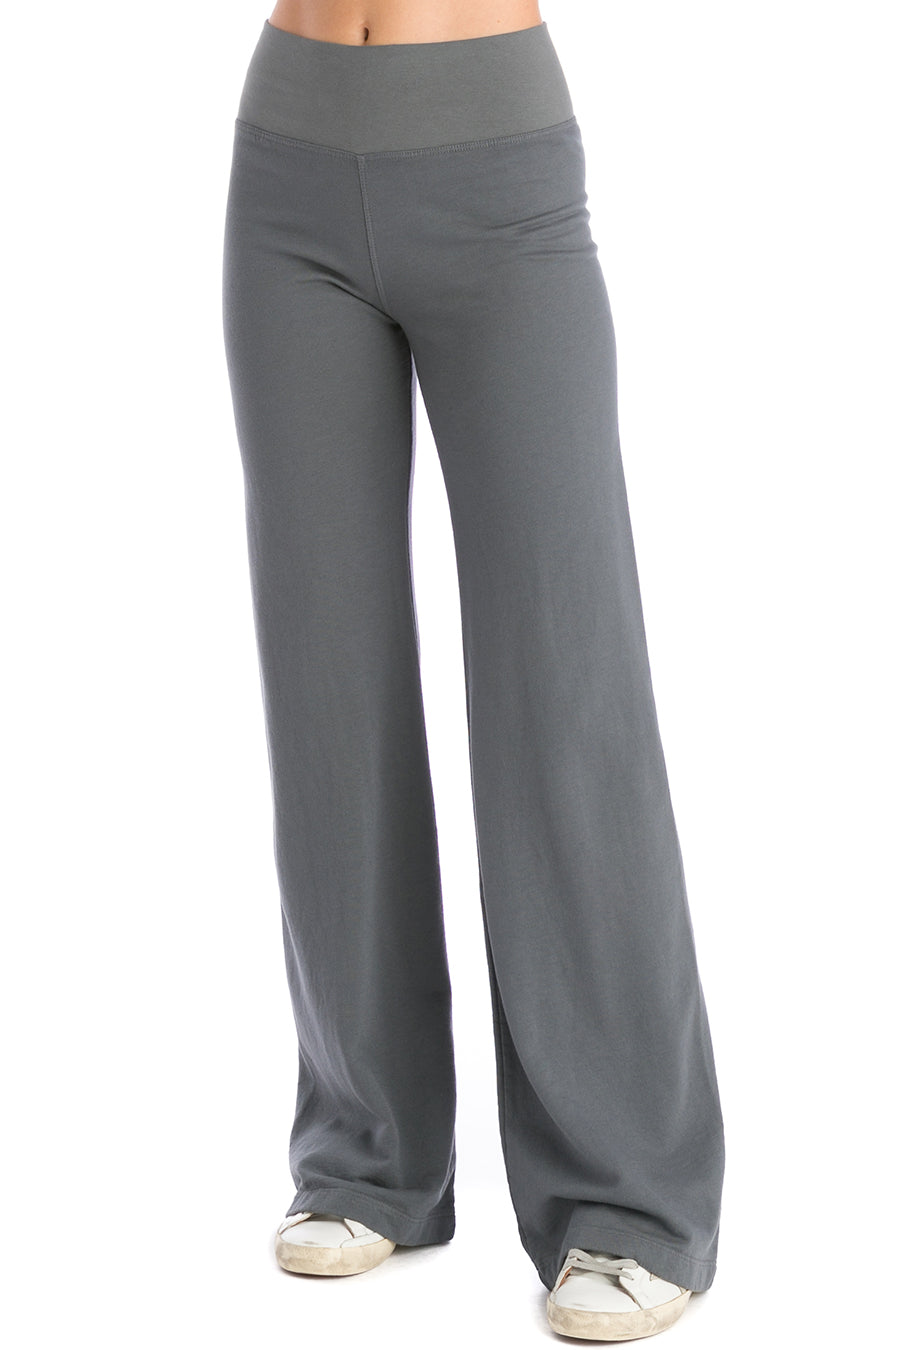 Hard Tail Forever Baby Fleece Flat Waist Pull-On Sweatpant - Onyx